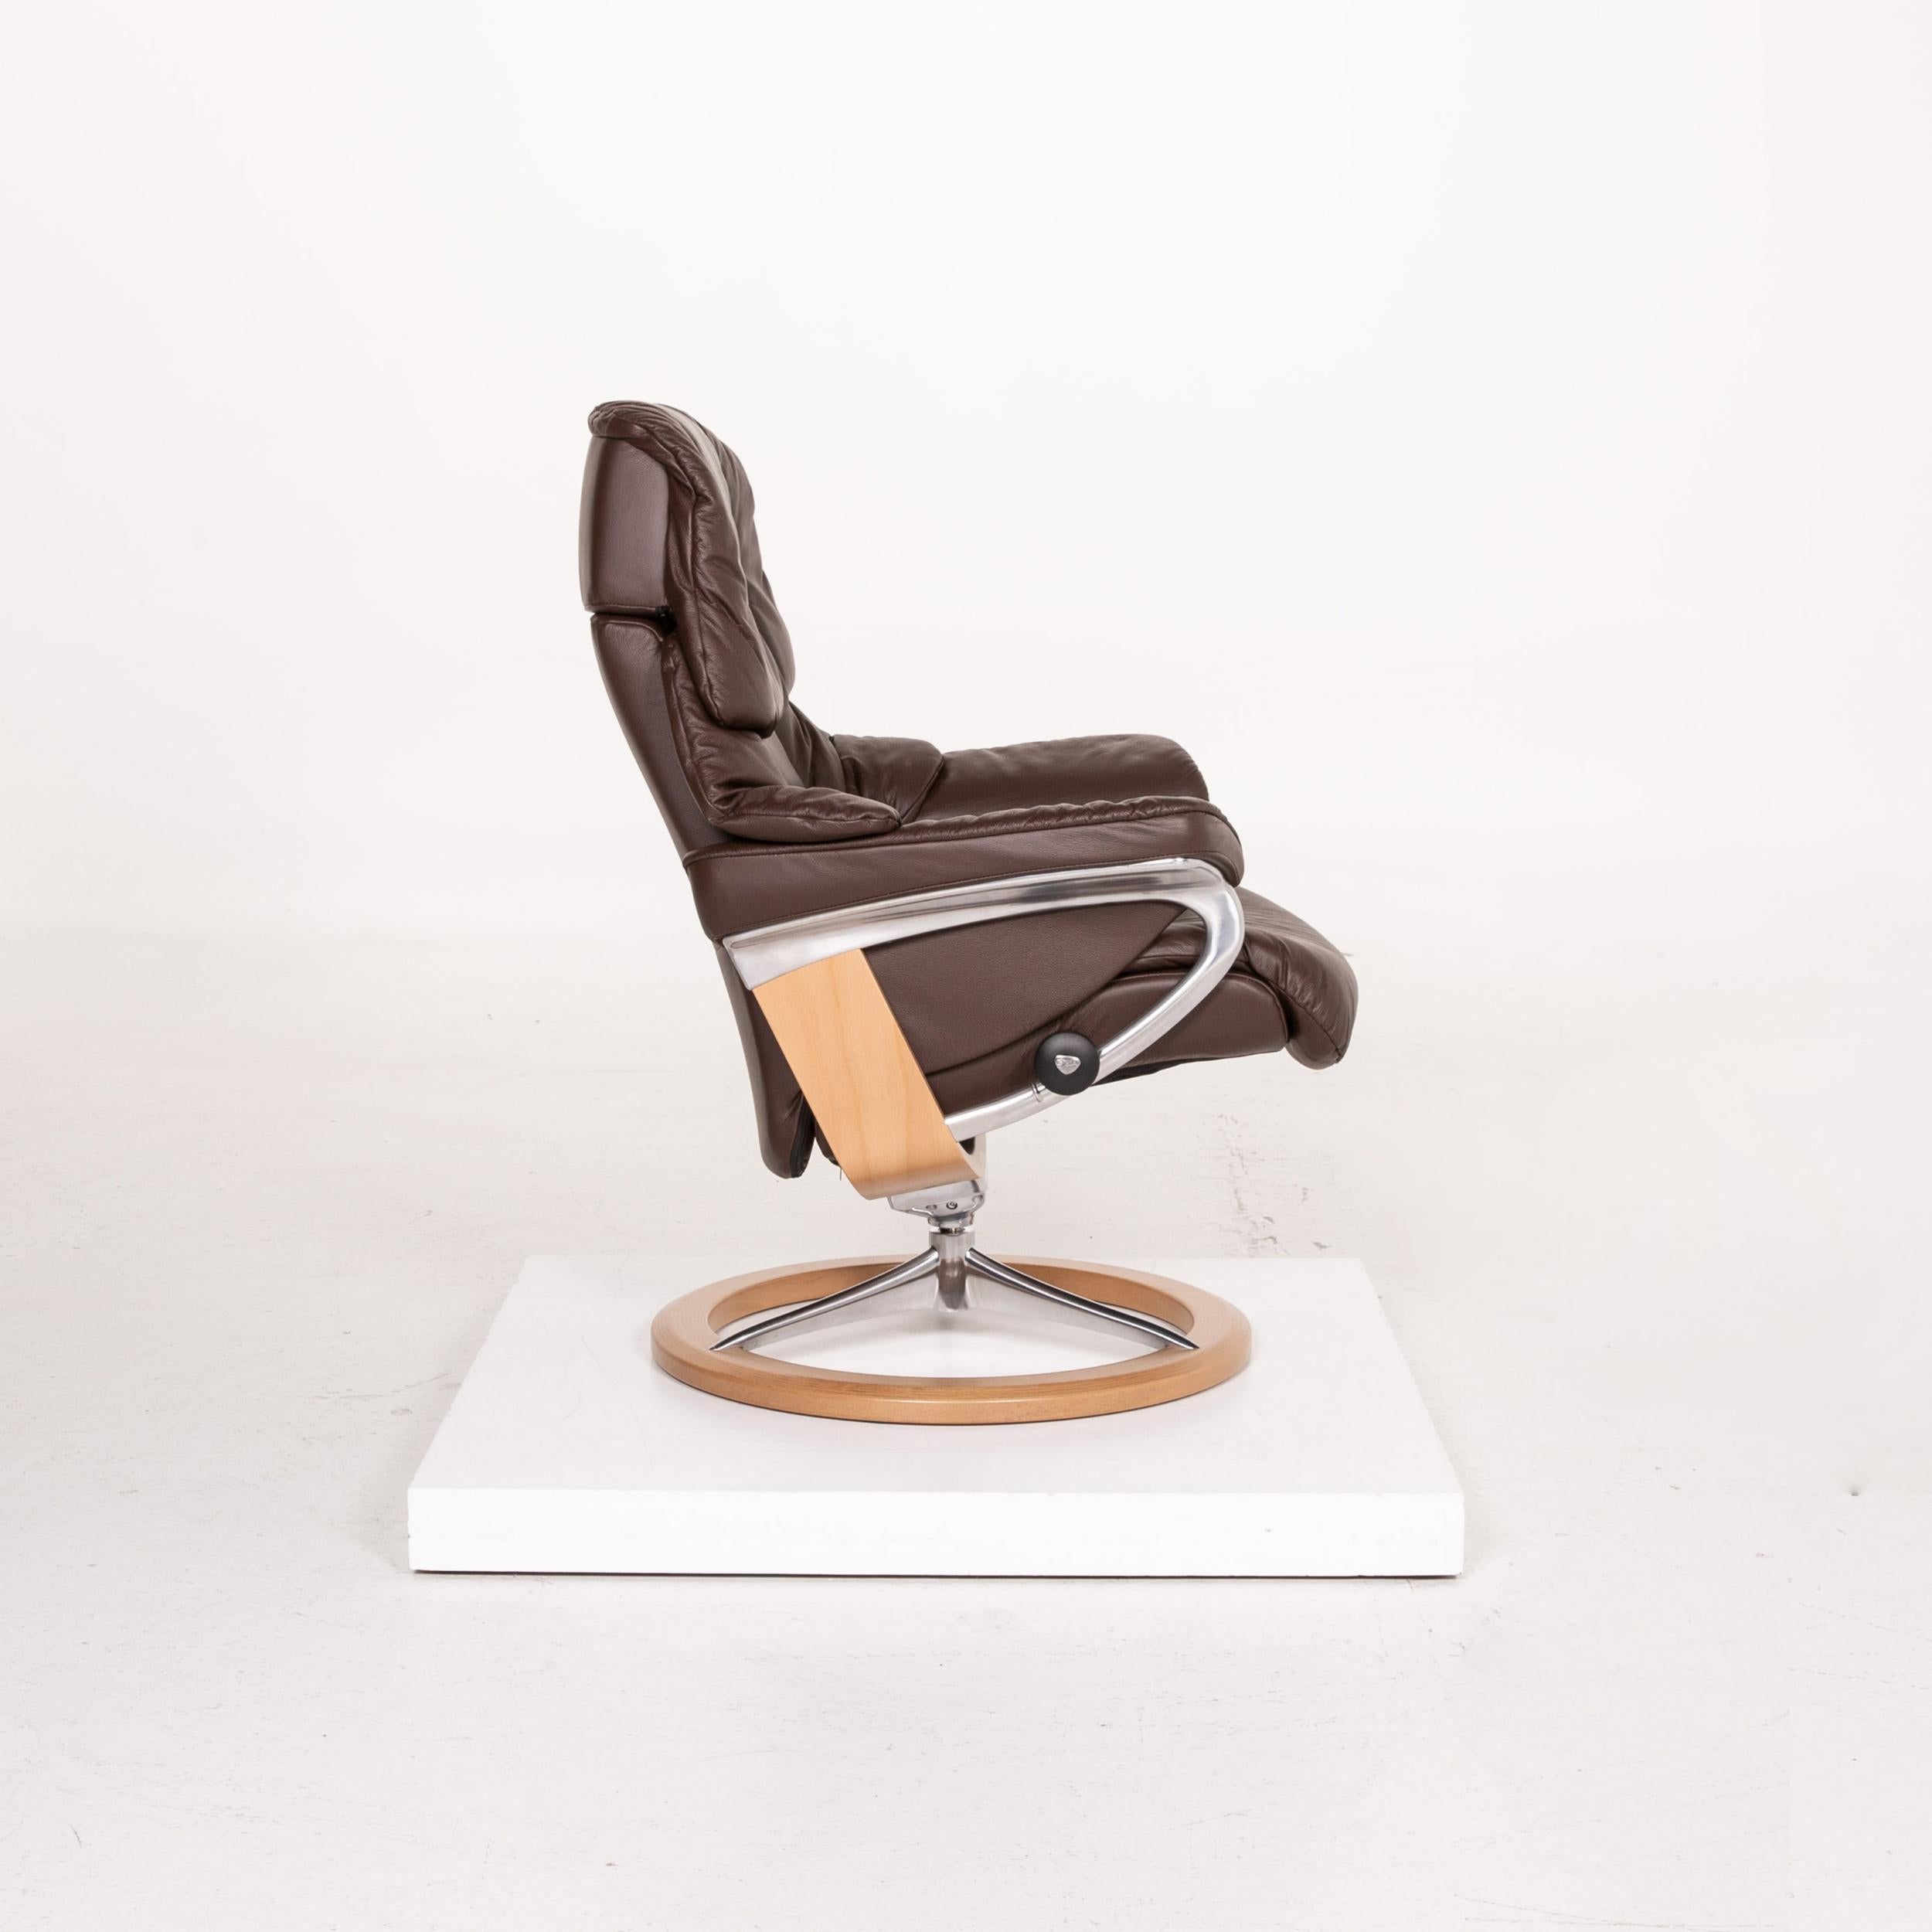 Stressless Reno Leather Armchair Incl. Stool Dark Brown Brown Relaxation 6